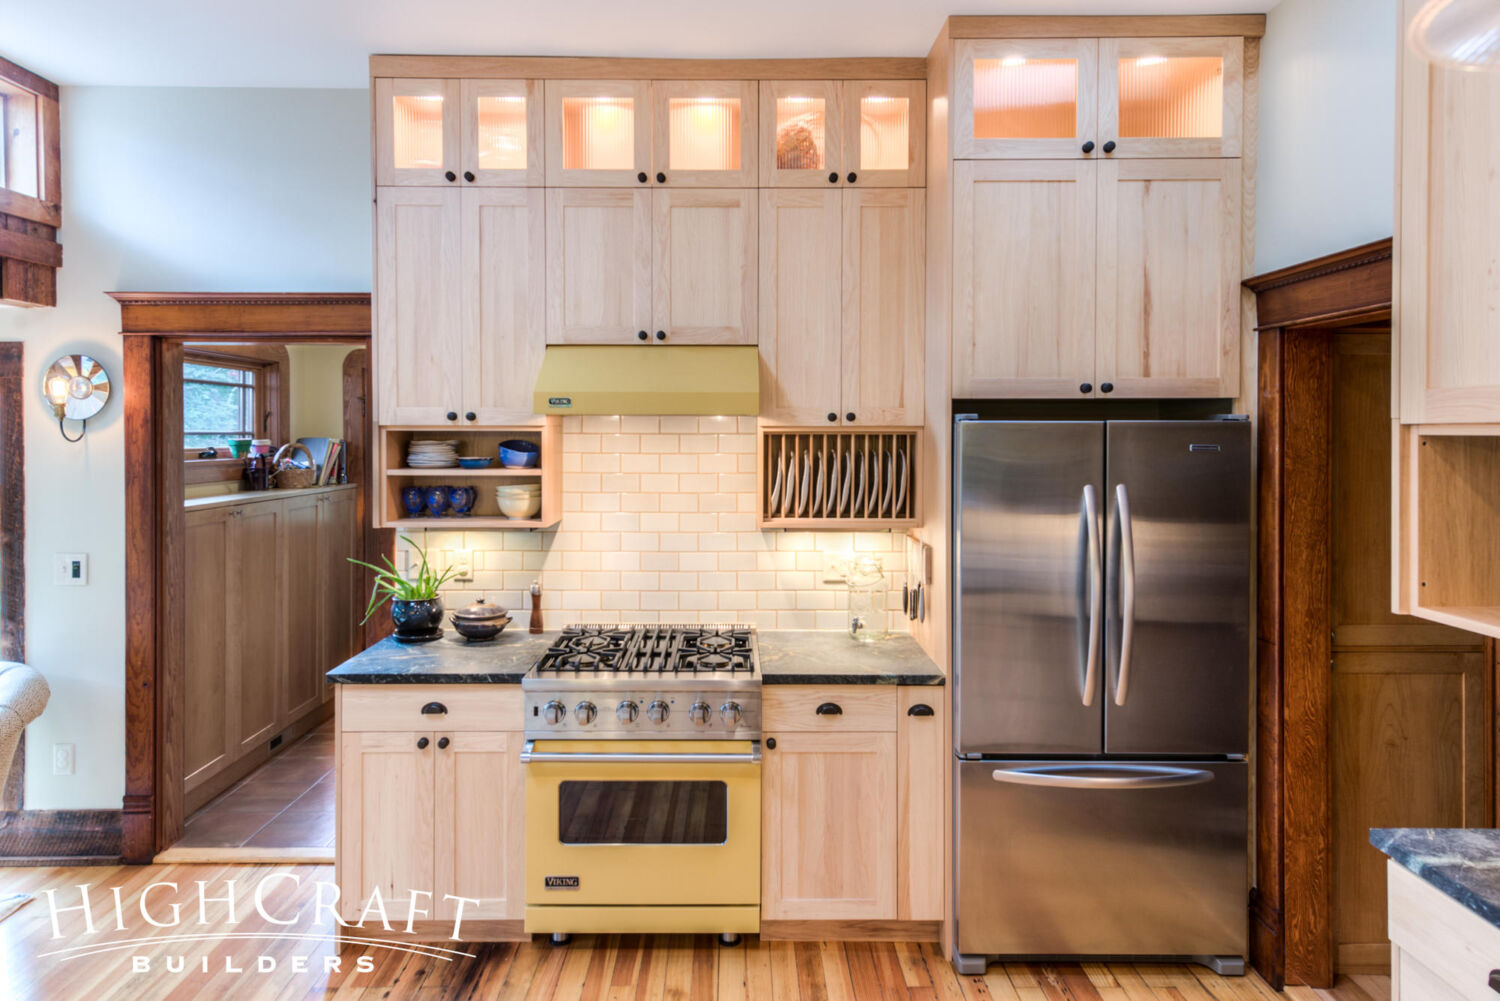 Historic-Second-Story-Addition-Light-Cabinetry-Yellow-Range-Plate-Storage